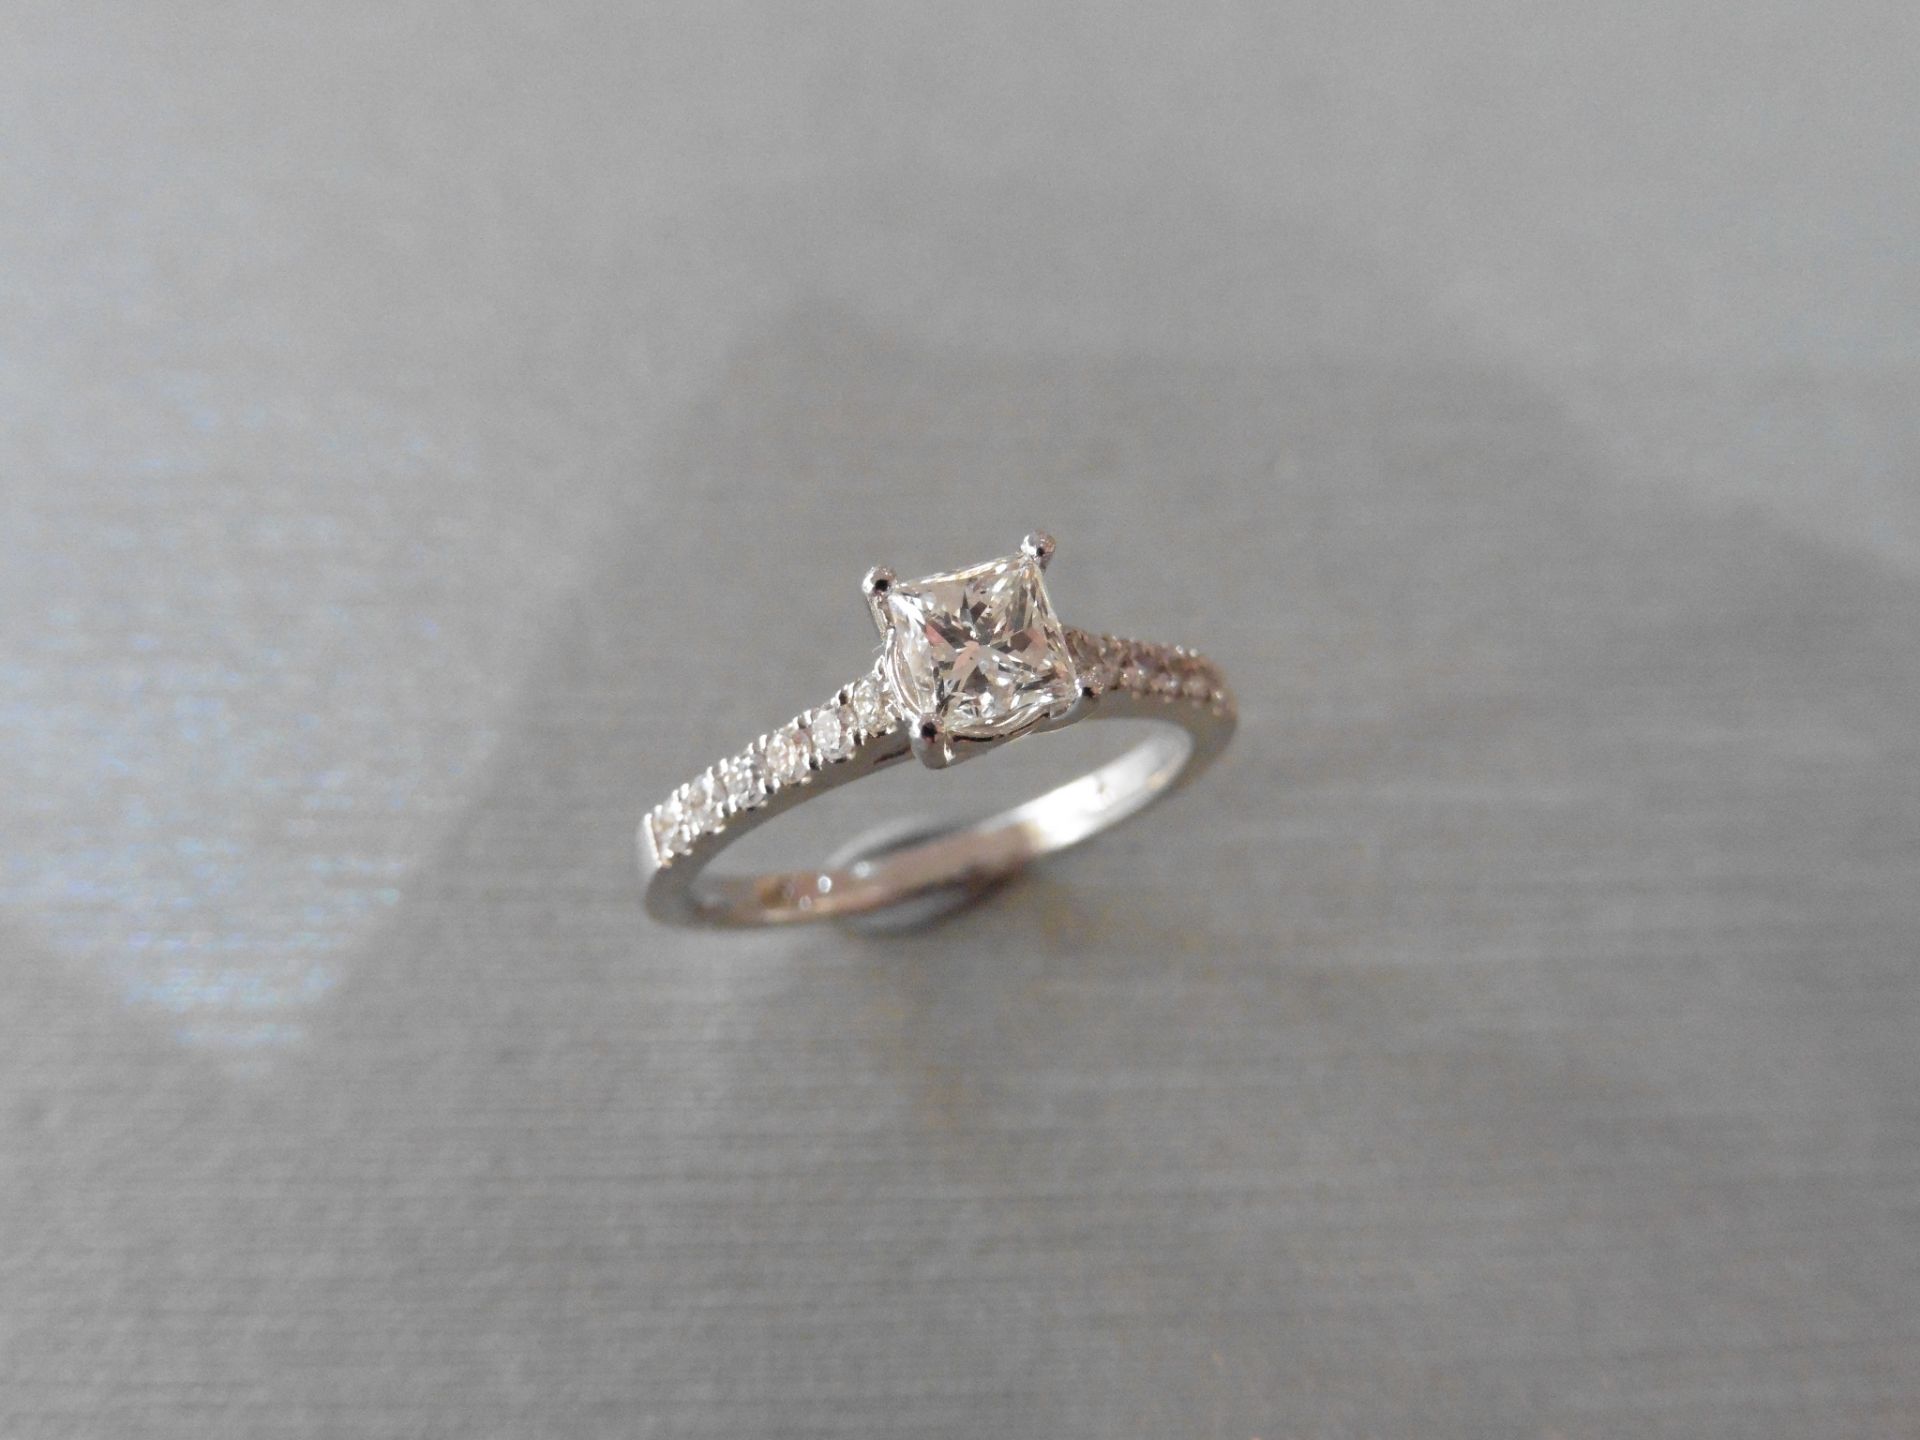 Princess cut diamond set solitaire 0.50ct, H colour and Si2 clarity in a four claw setting. The